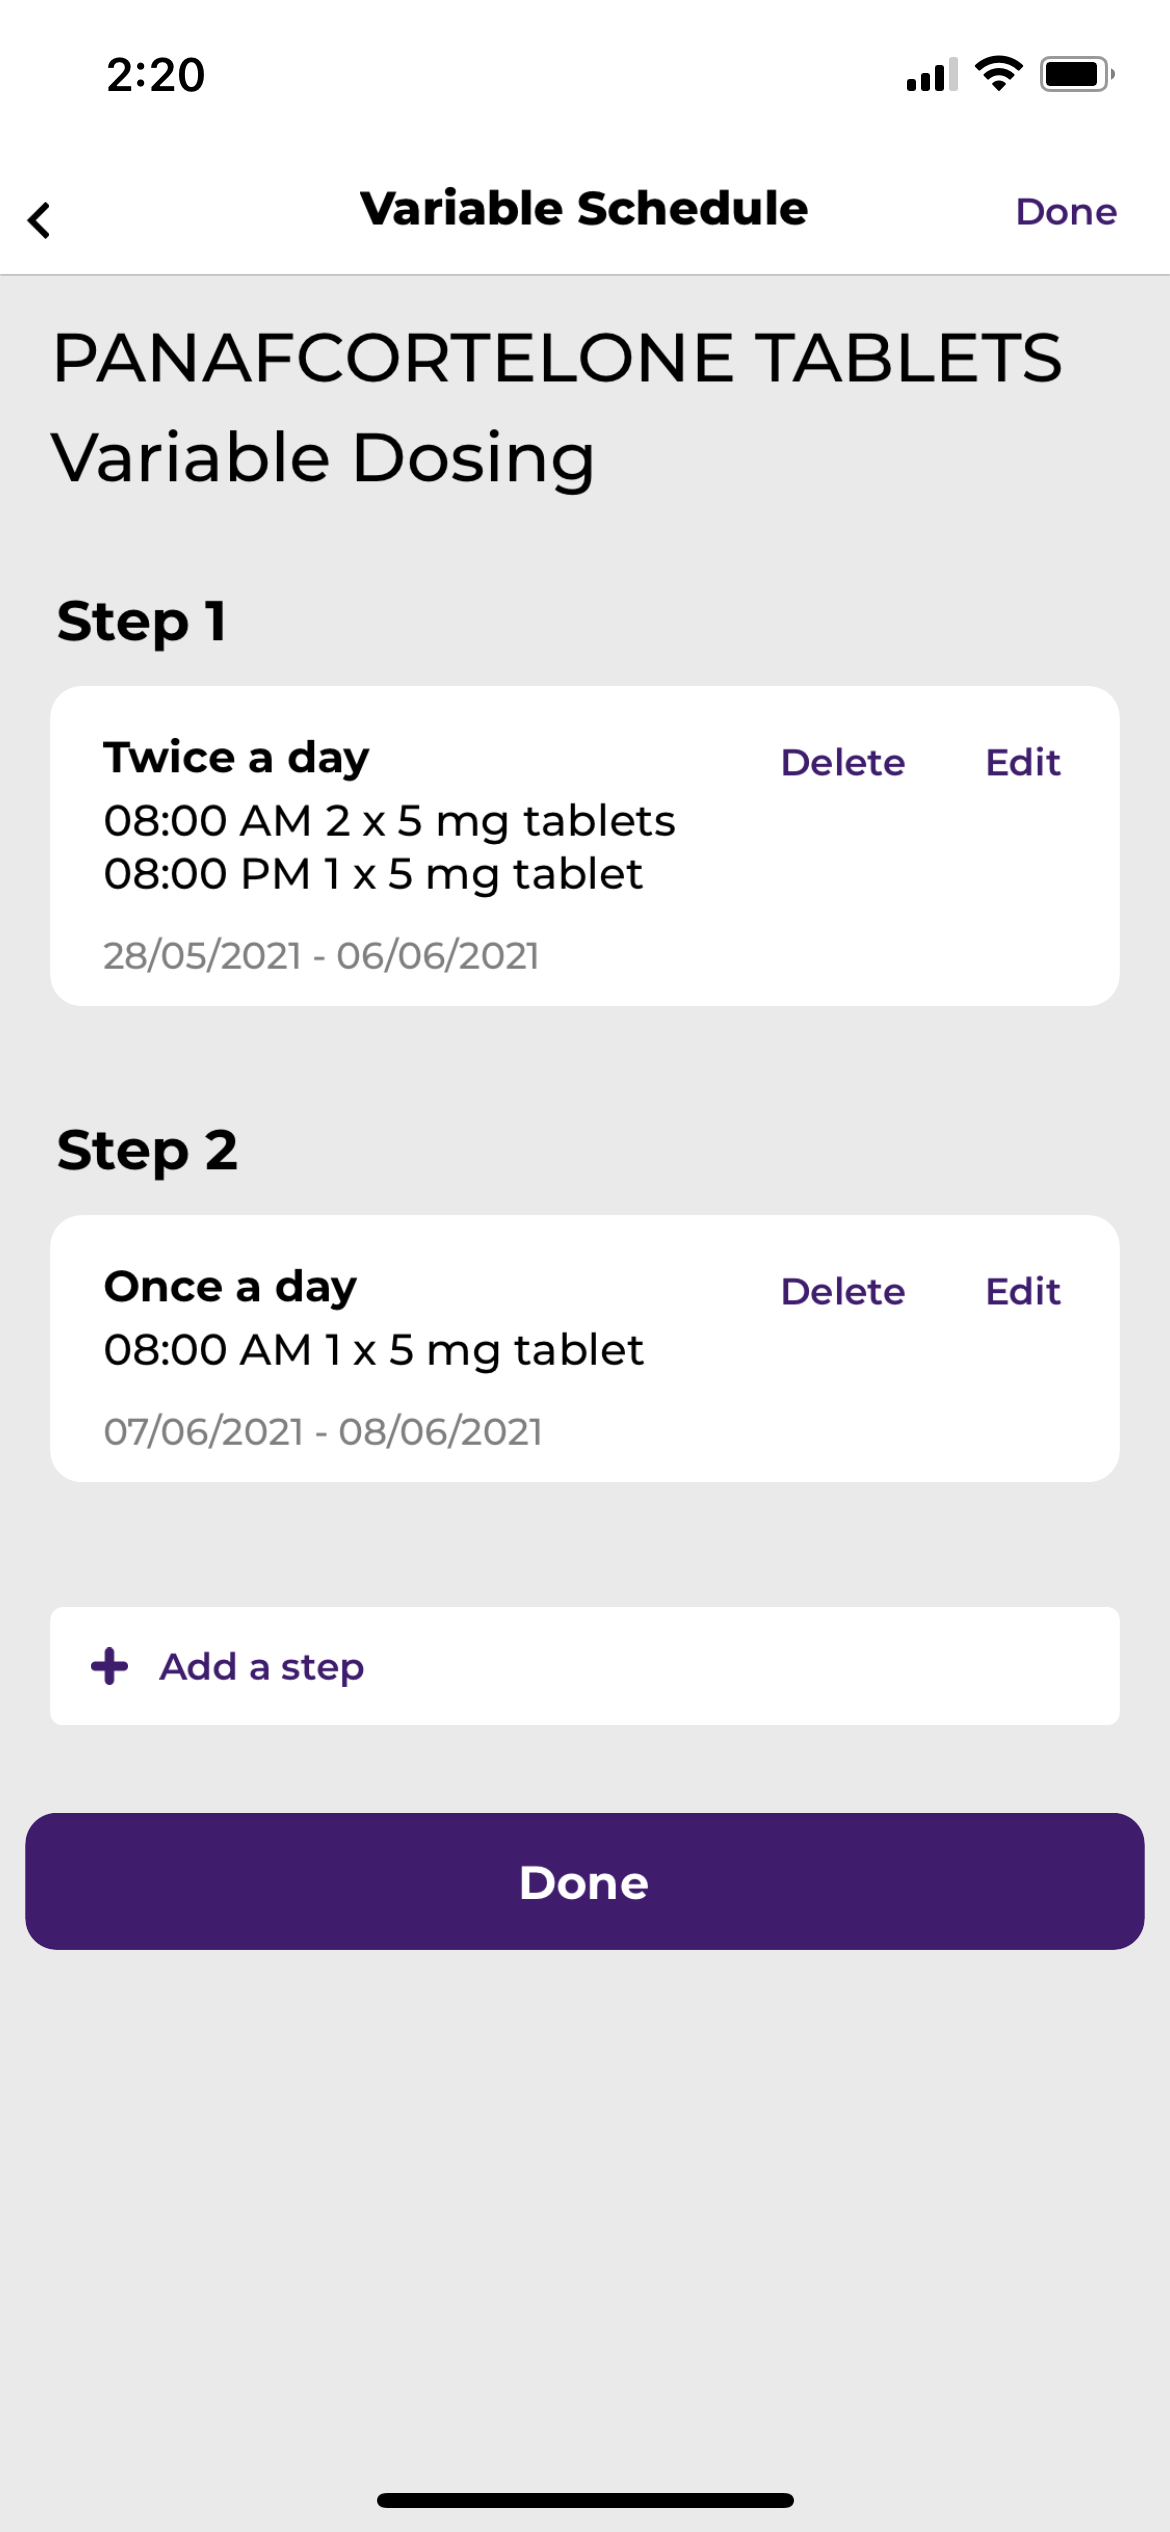 MedicineWise app variable schedule overview